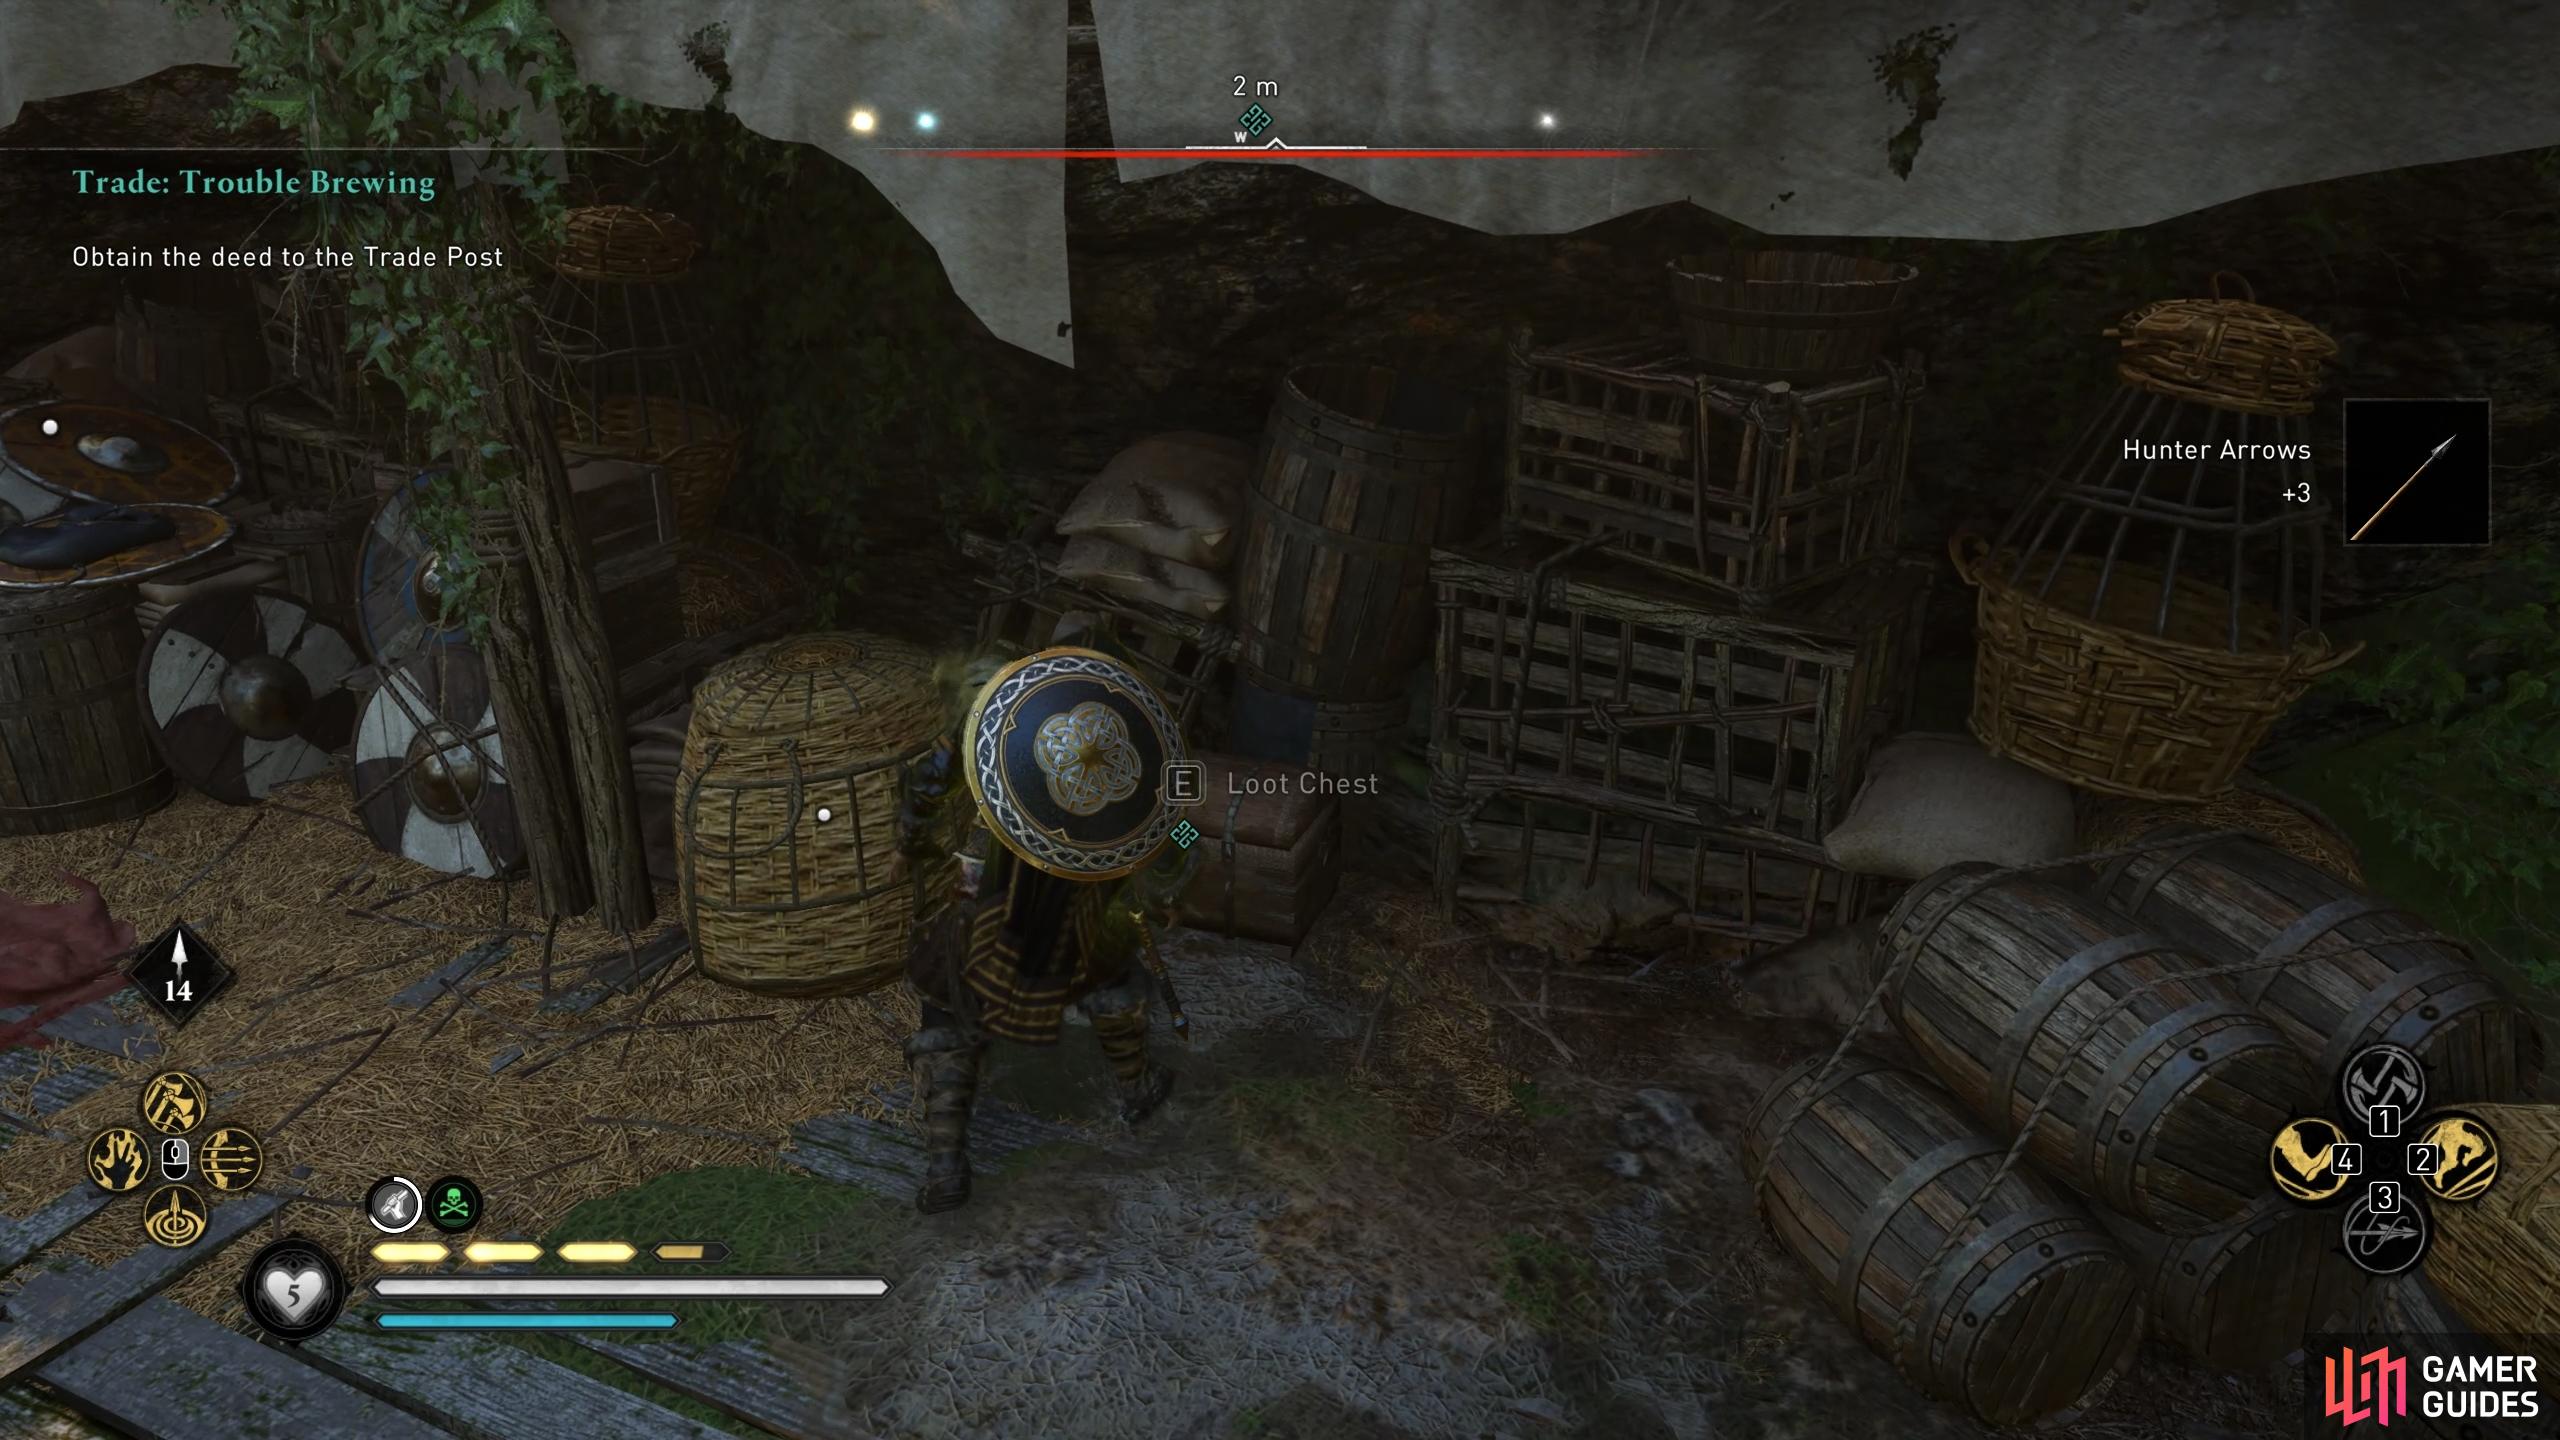 Youll need to loot the deed from a chest in the camp.